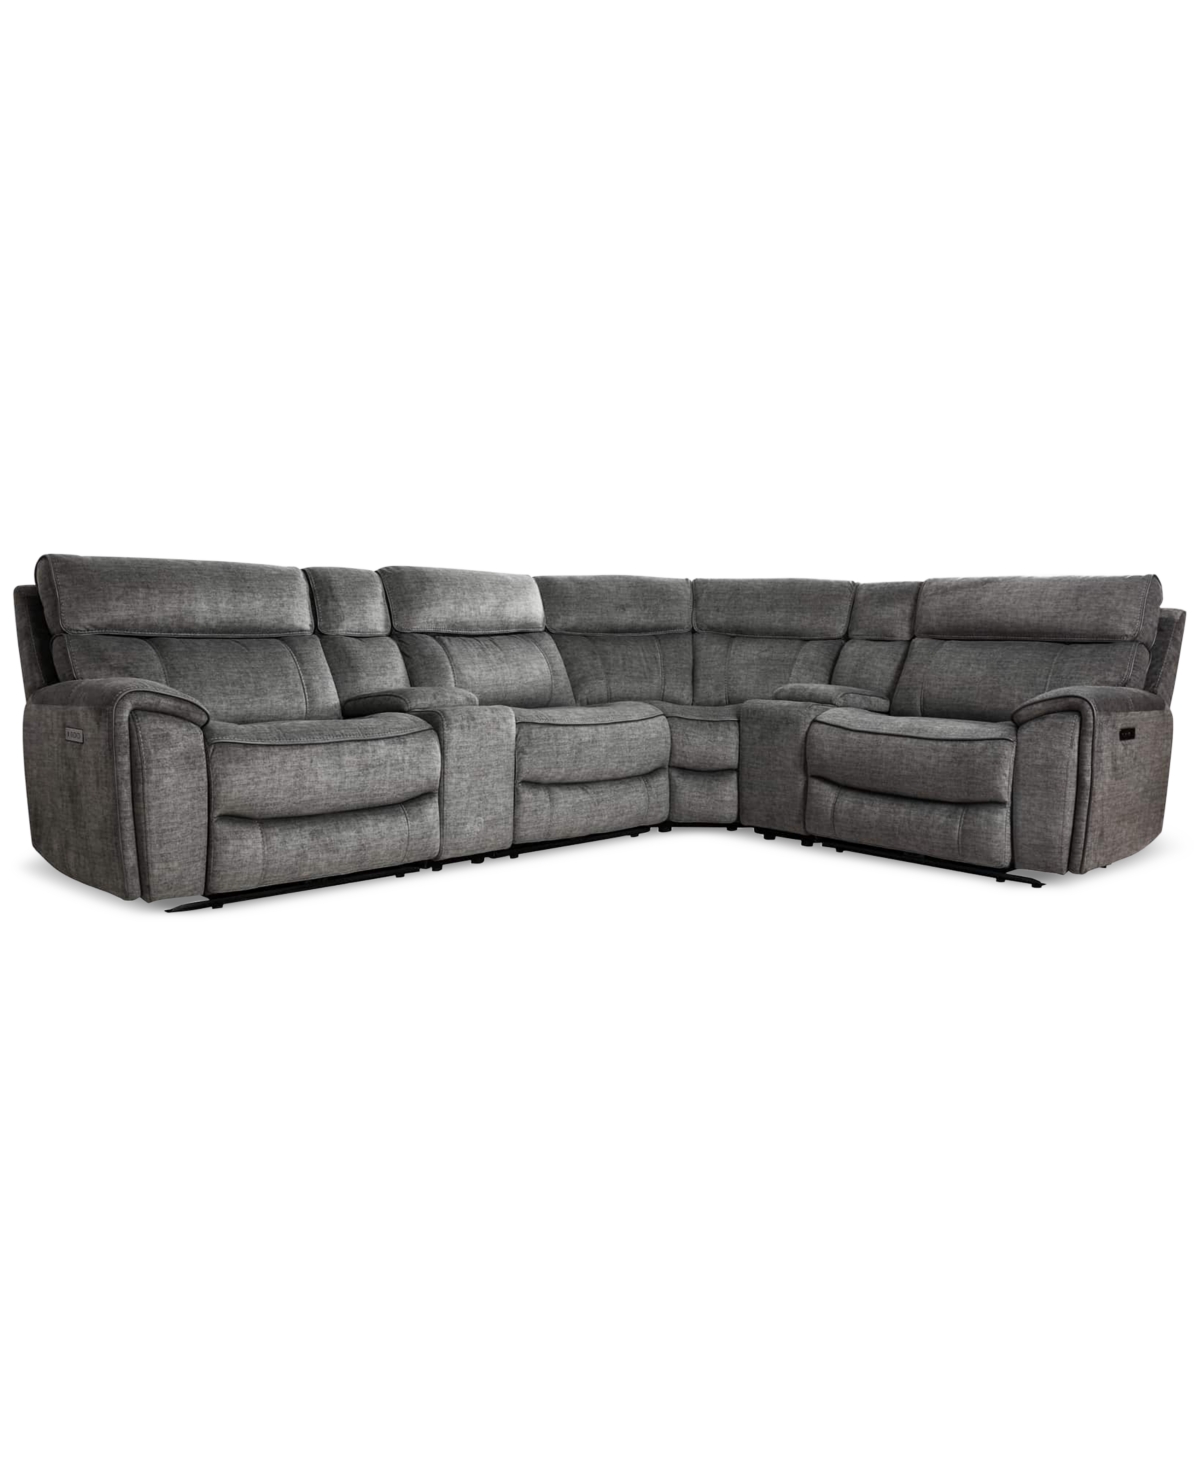 Furniture Hutchenson 6pc Fabric Sectional With 2 Usb Power Recliners, 2 Consoles In Charcoal Moss